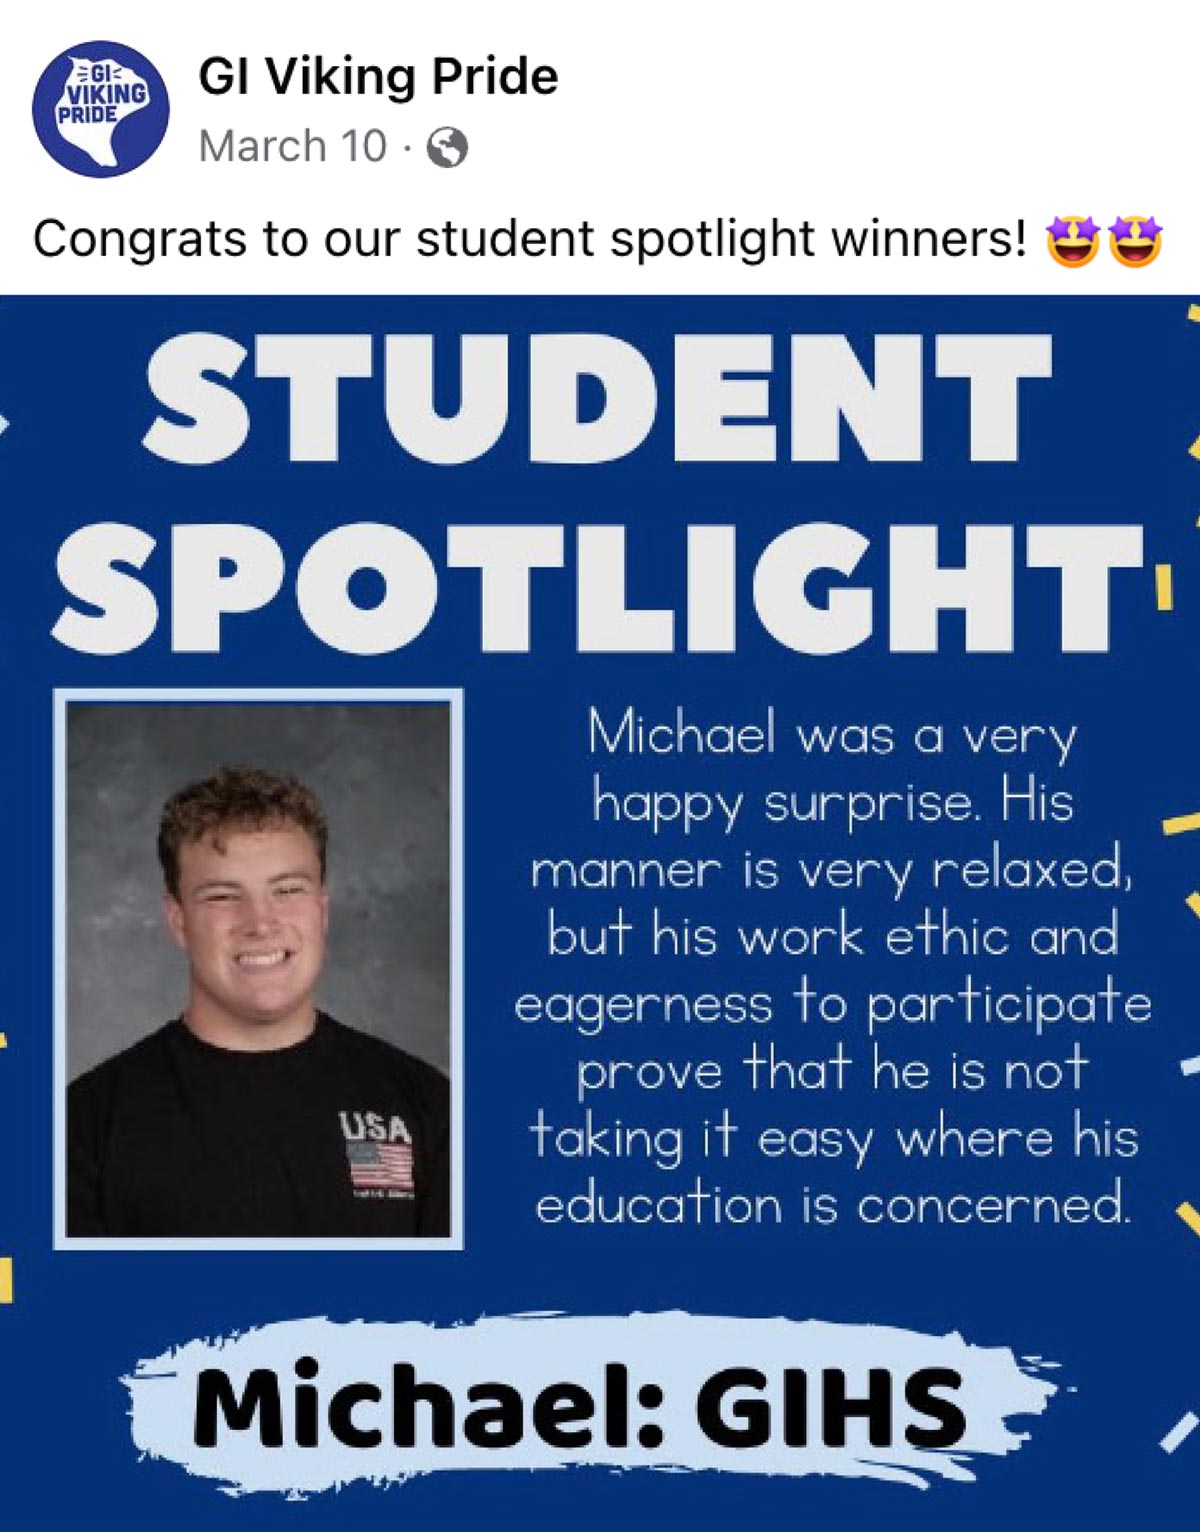 screen shot of GI Viking Pride Facebook post giving a shout out to a spotlight student